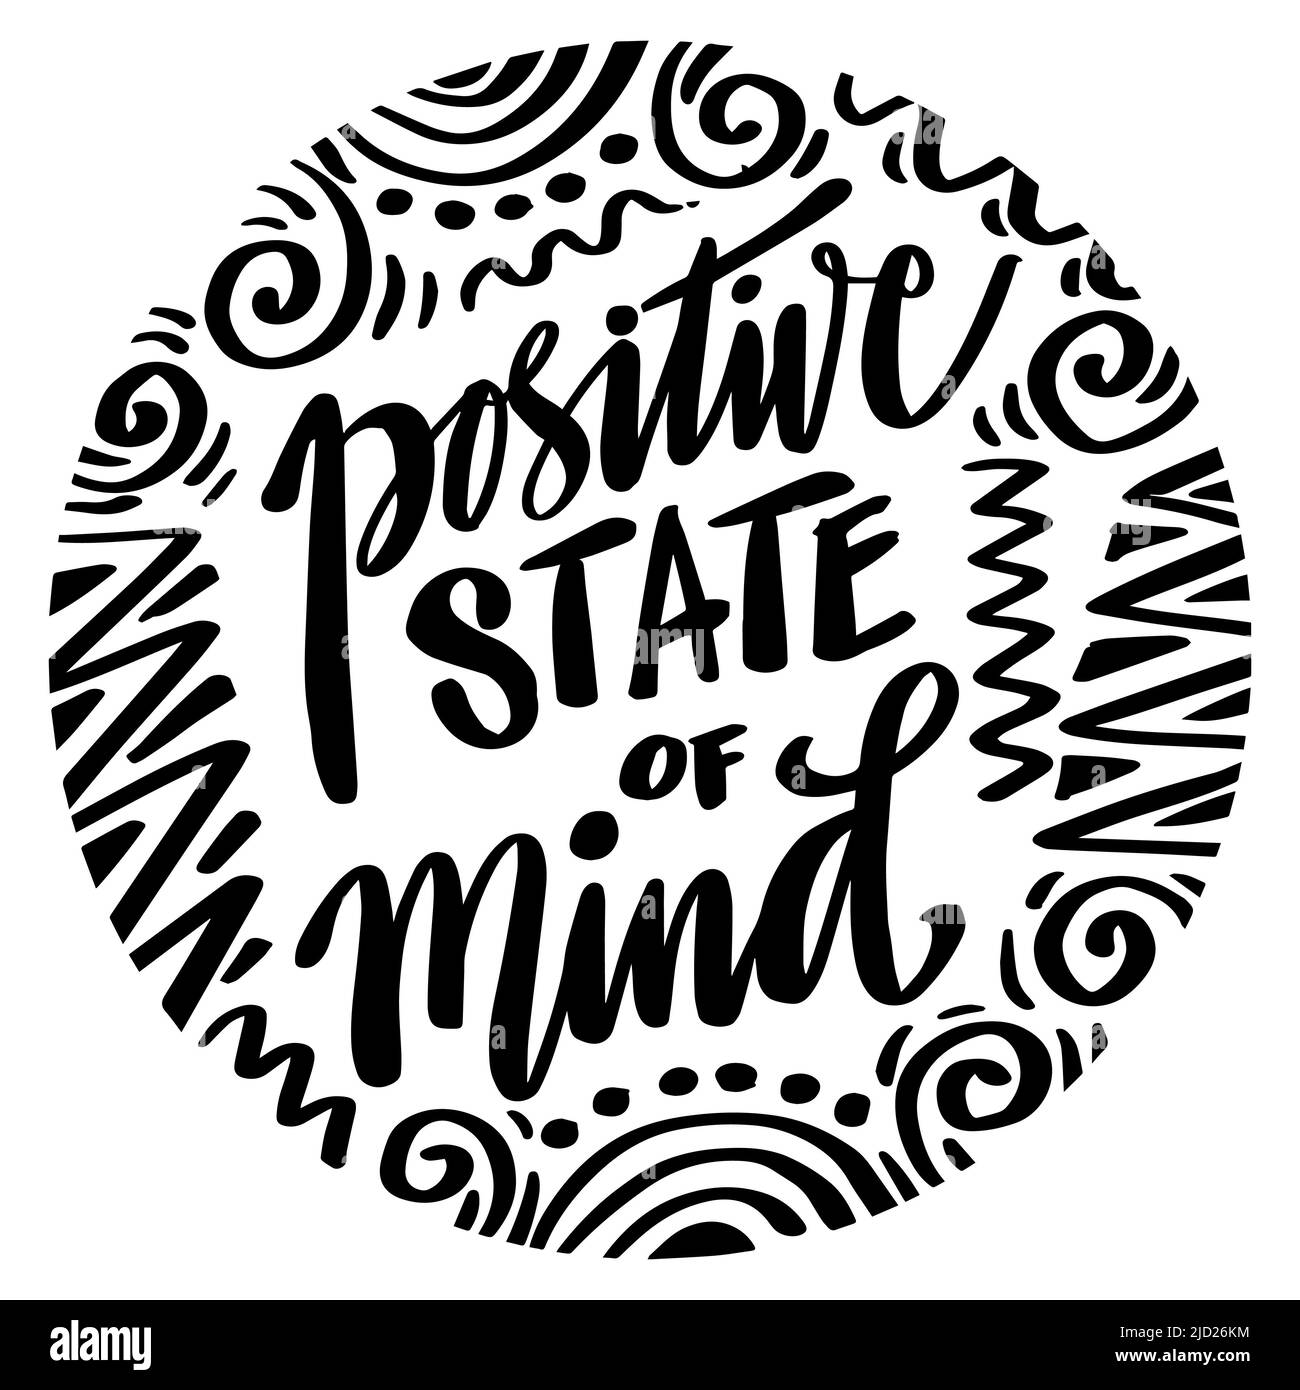 Positive state of mind. Positive quotes. Stock Photo